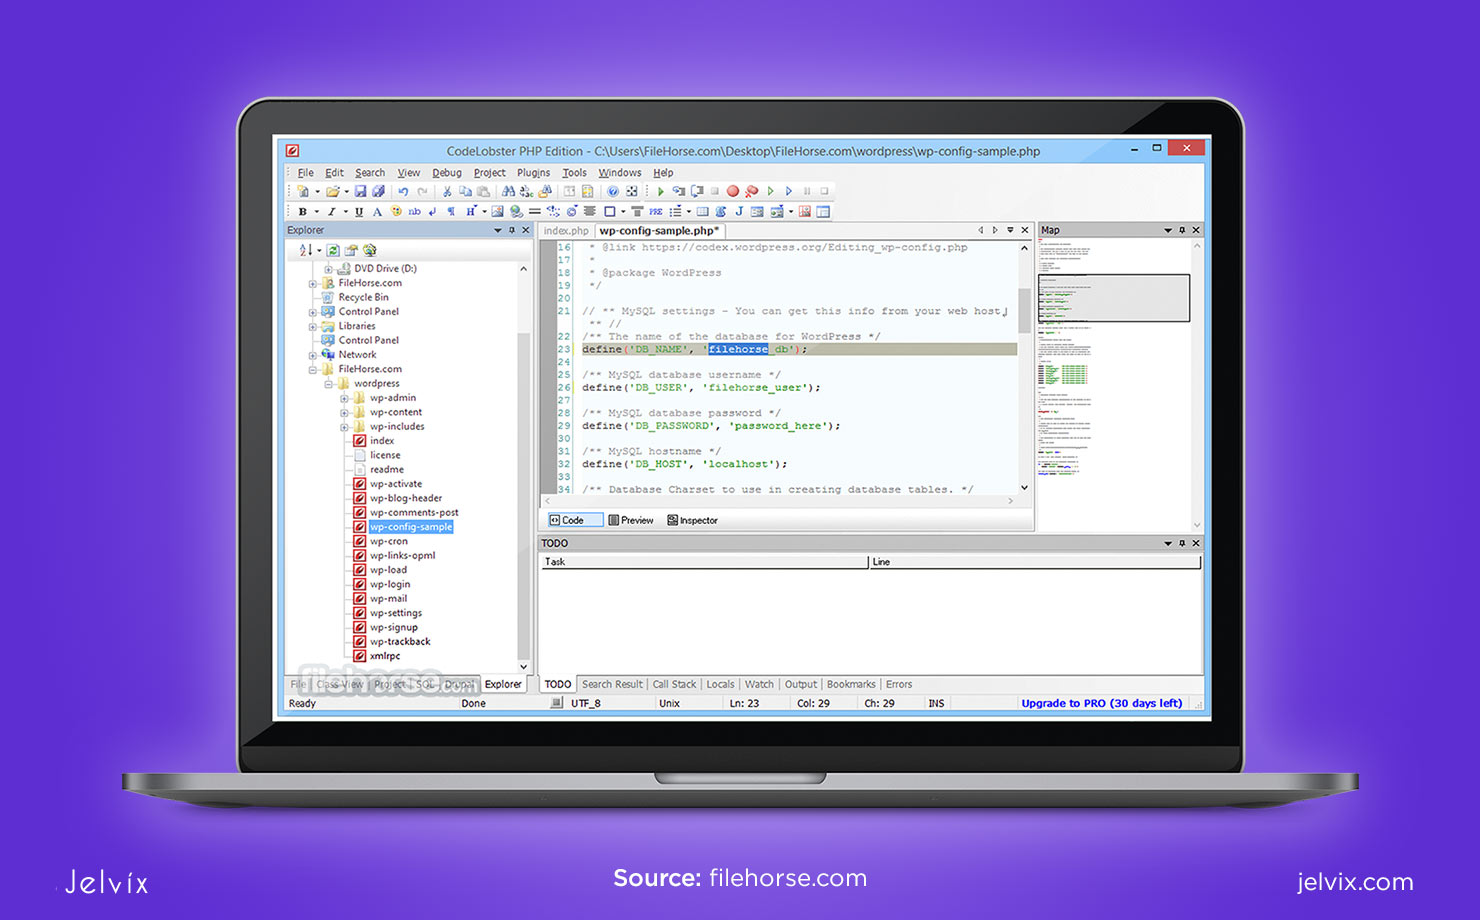 CodeLobster IDE Professional 2.4 for android download